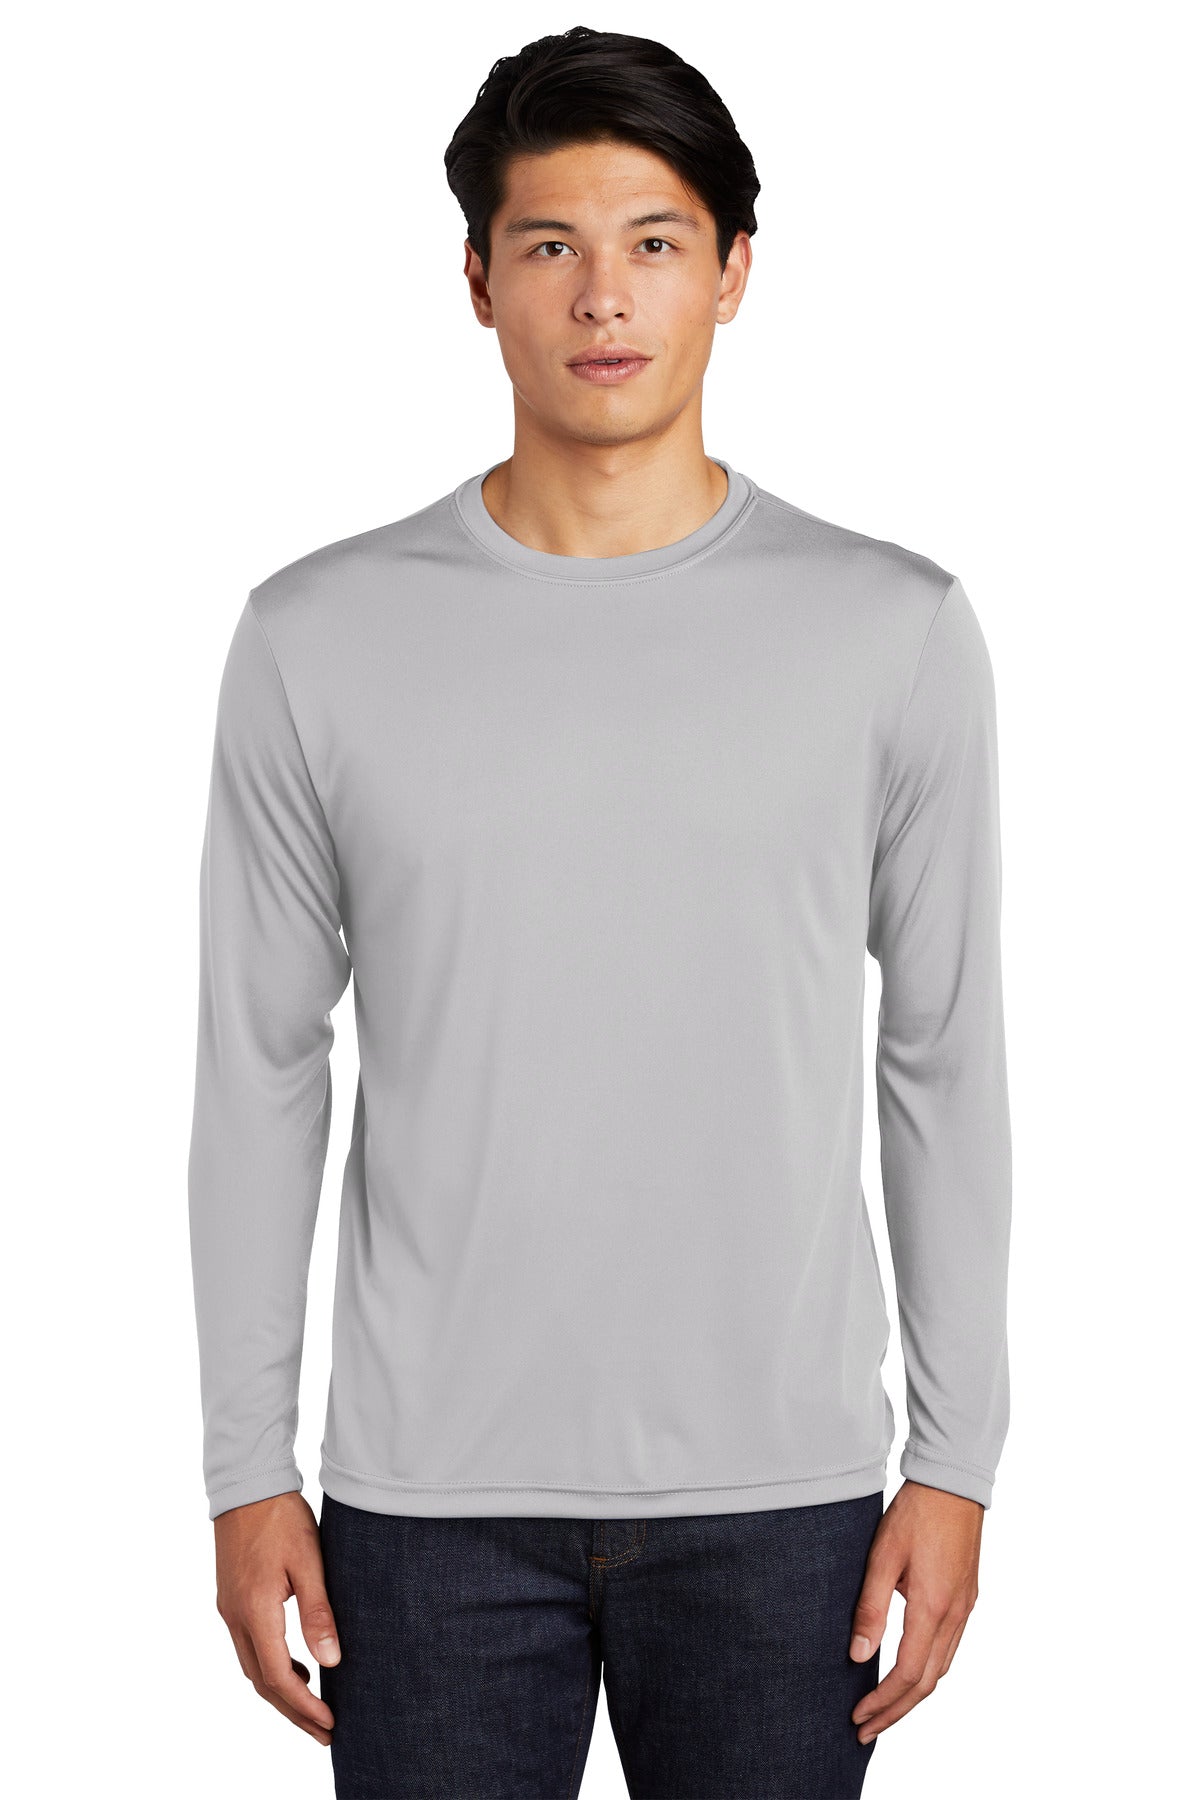 Sport-Tek® Long Sleeve PosiCharge® Competitor™ Tee. ST350LS [Silver] - DFW Impression